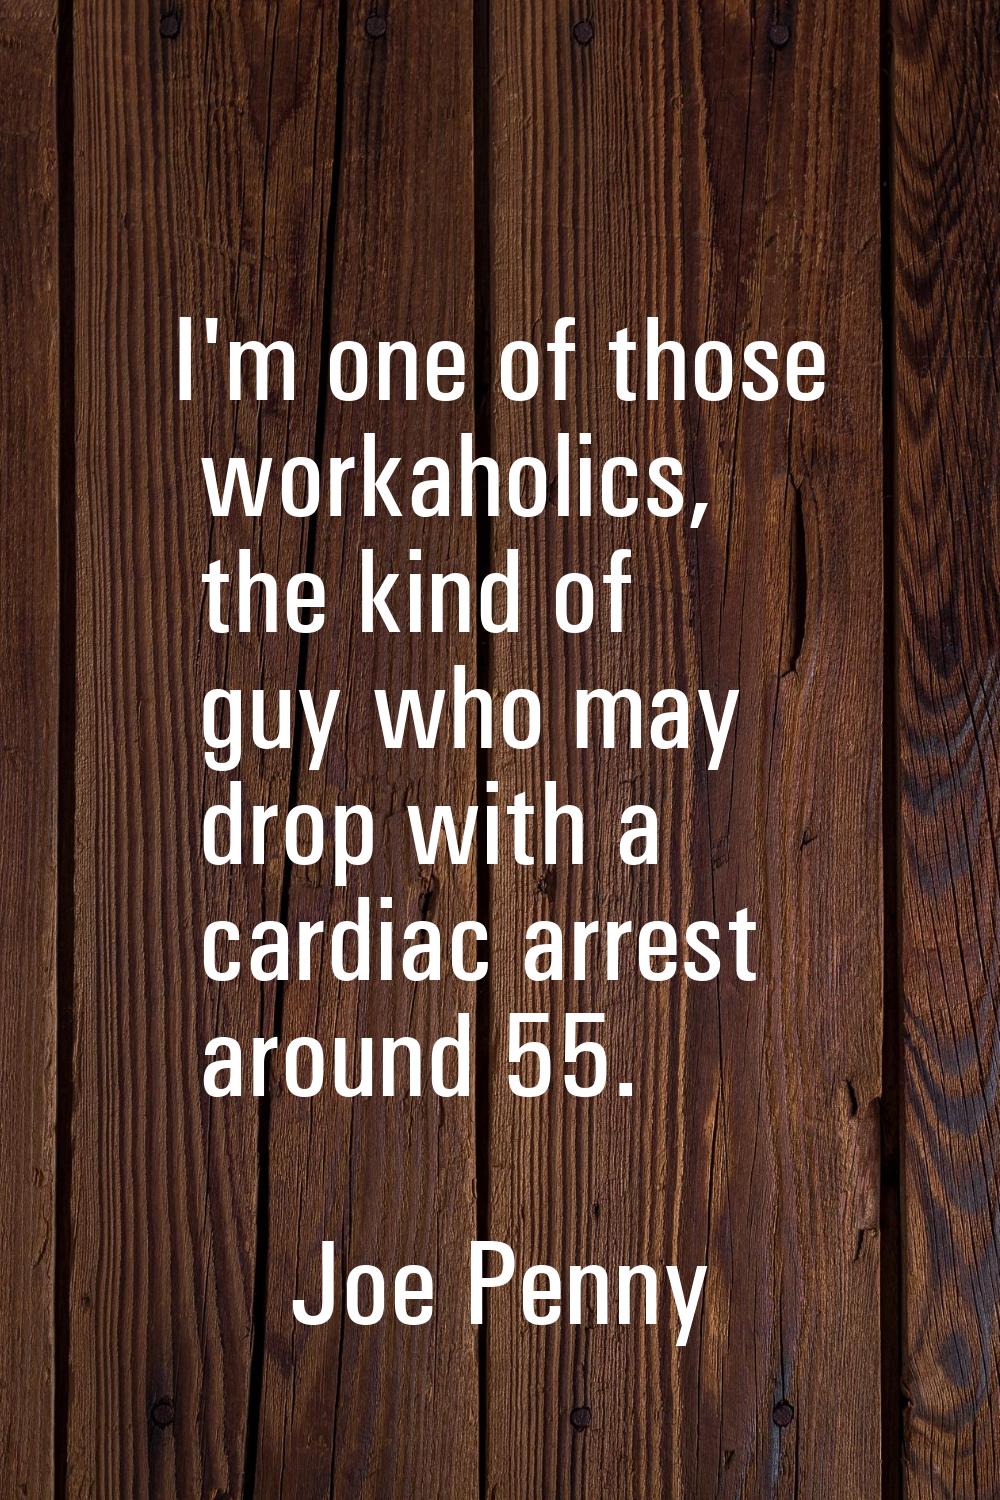 I'm one of those workaholics, the kind of guy who may drop with a cardiac arrest around 55.